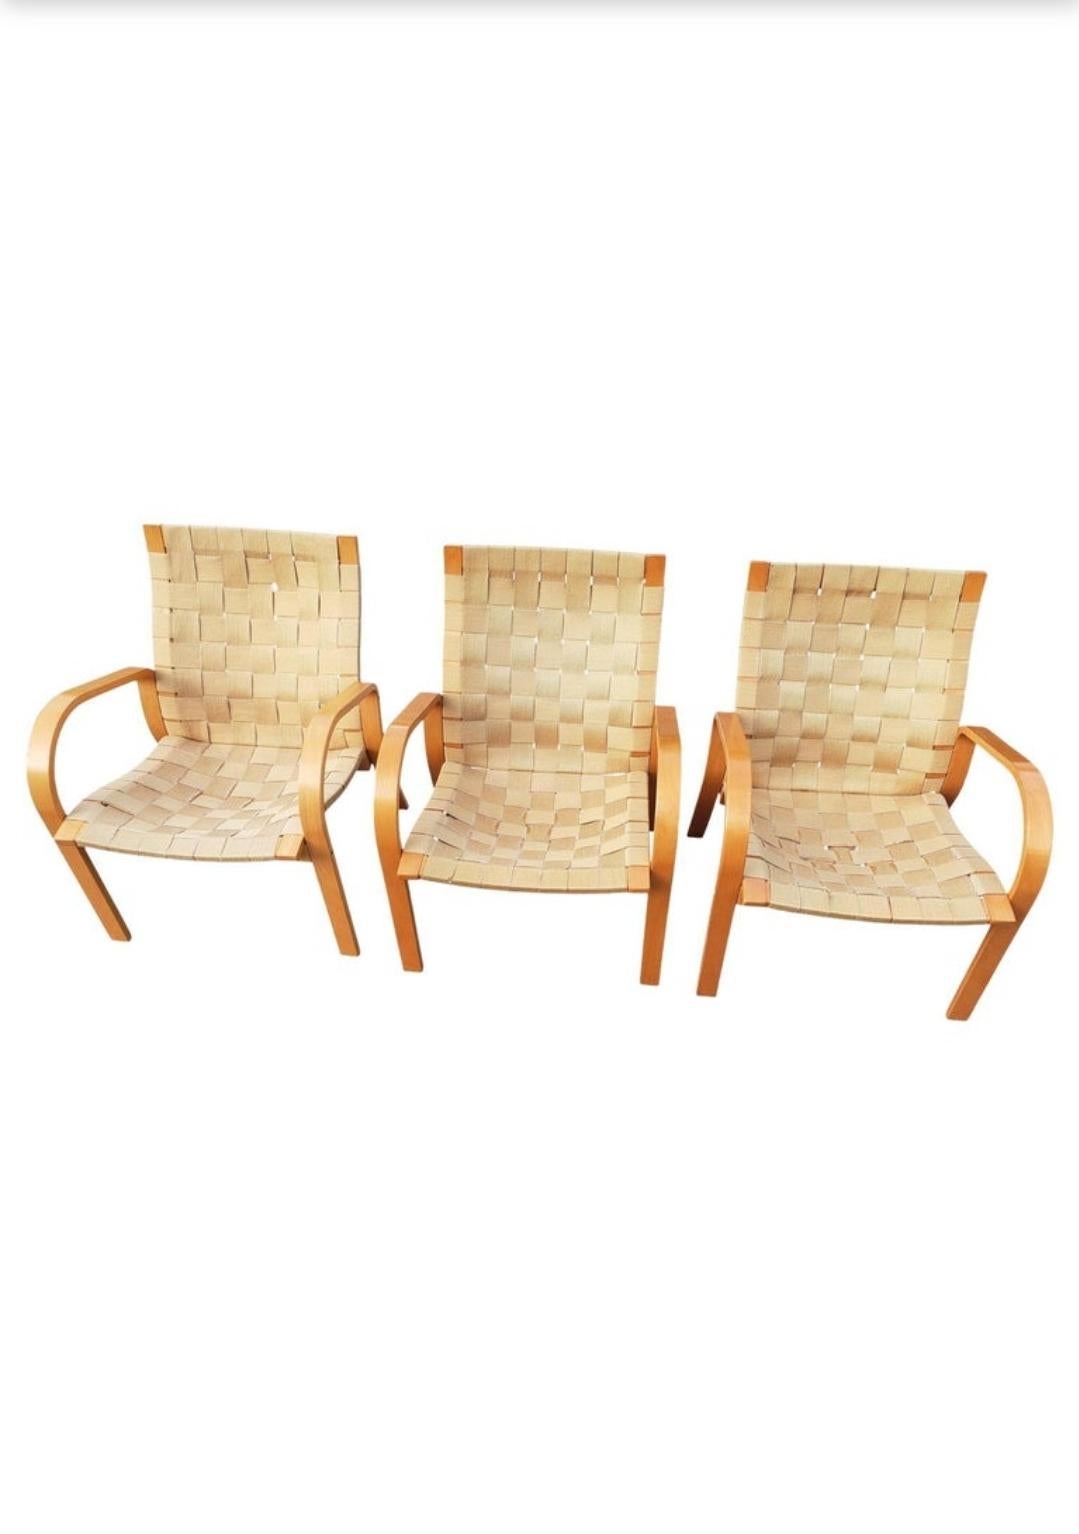 Mid Century Scandinavian Modern Beech and Canvas webbed lounge chair attributed to Bruno Mathsson.
Three 1970s lacquered beech wood chairs with gold woven canvas webbed strapping. Beech frame in very good condition.Some of the canvas straps show